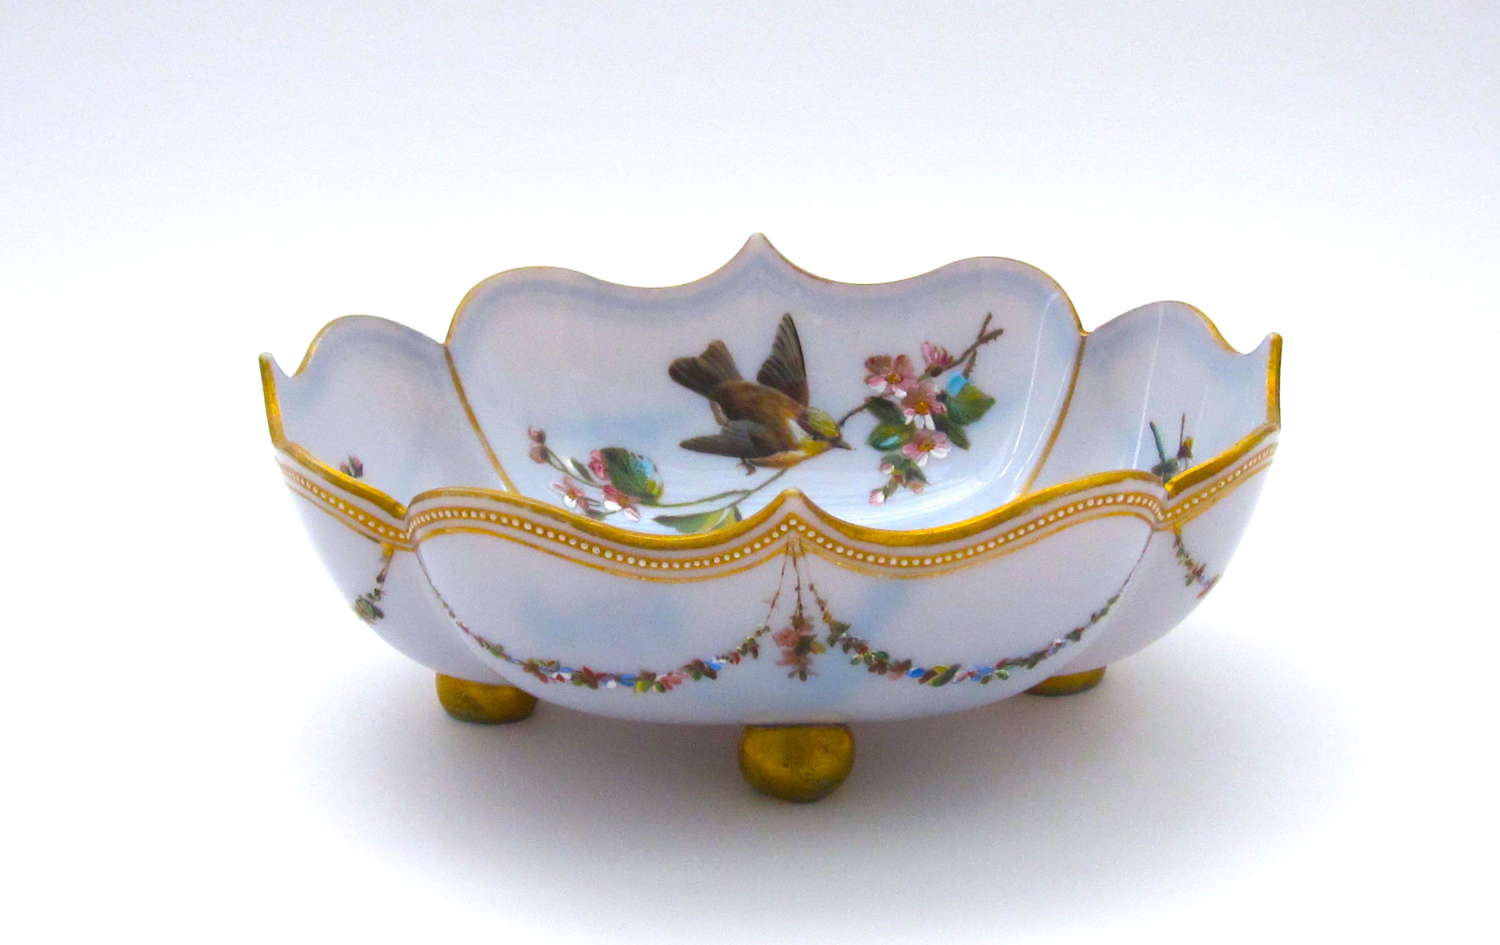 Antique Pale Lavender Opaline Glass Dish Decorated with Birds